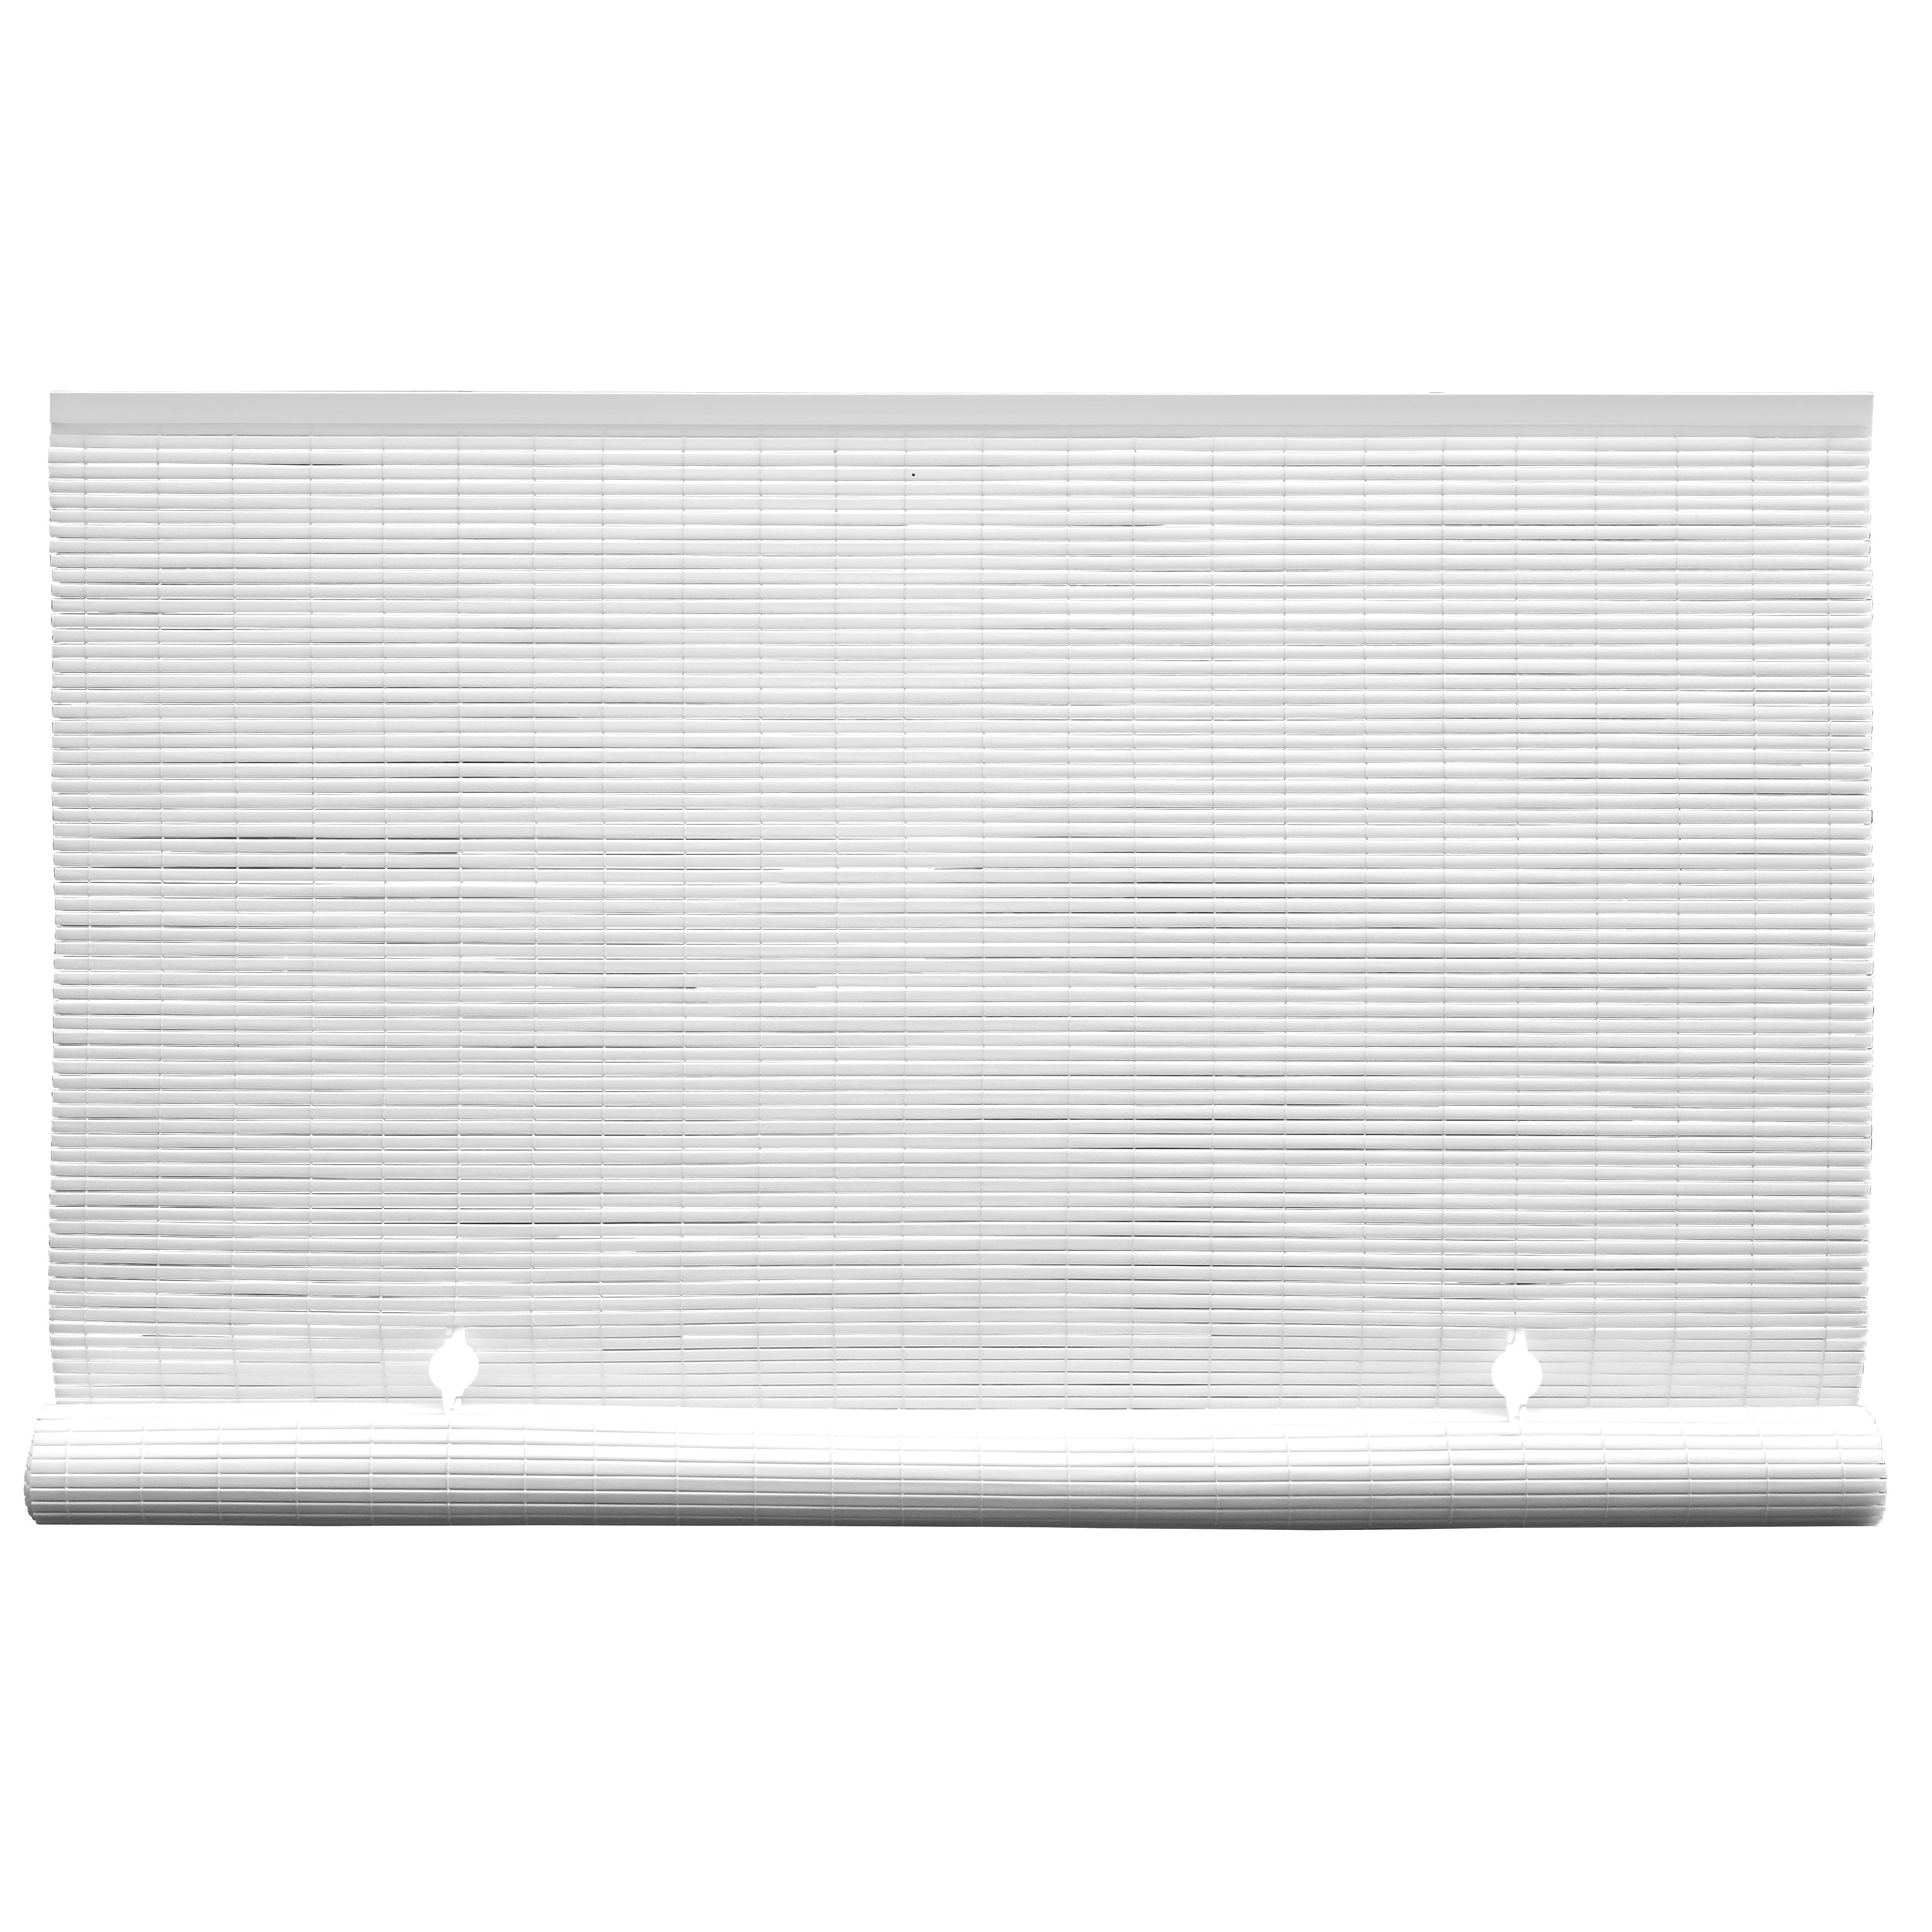 Radiance Cordless 1/4" PVC Roll-up White Outdoor Sun Shade, 3'x6', Multiple Sizes - image 1 of 5